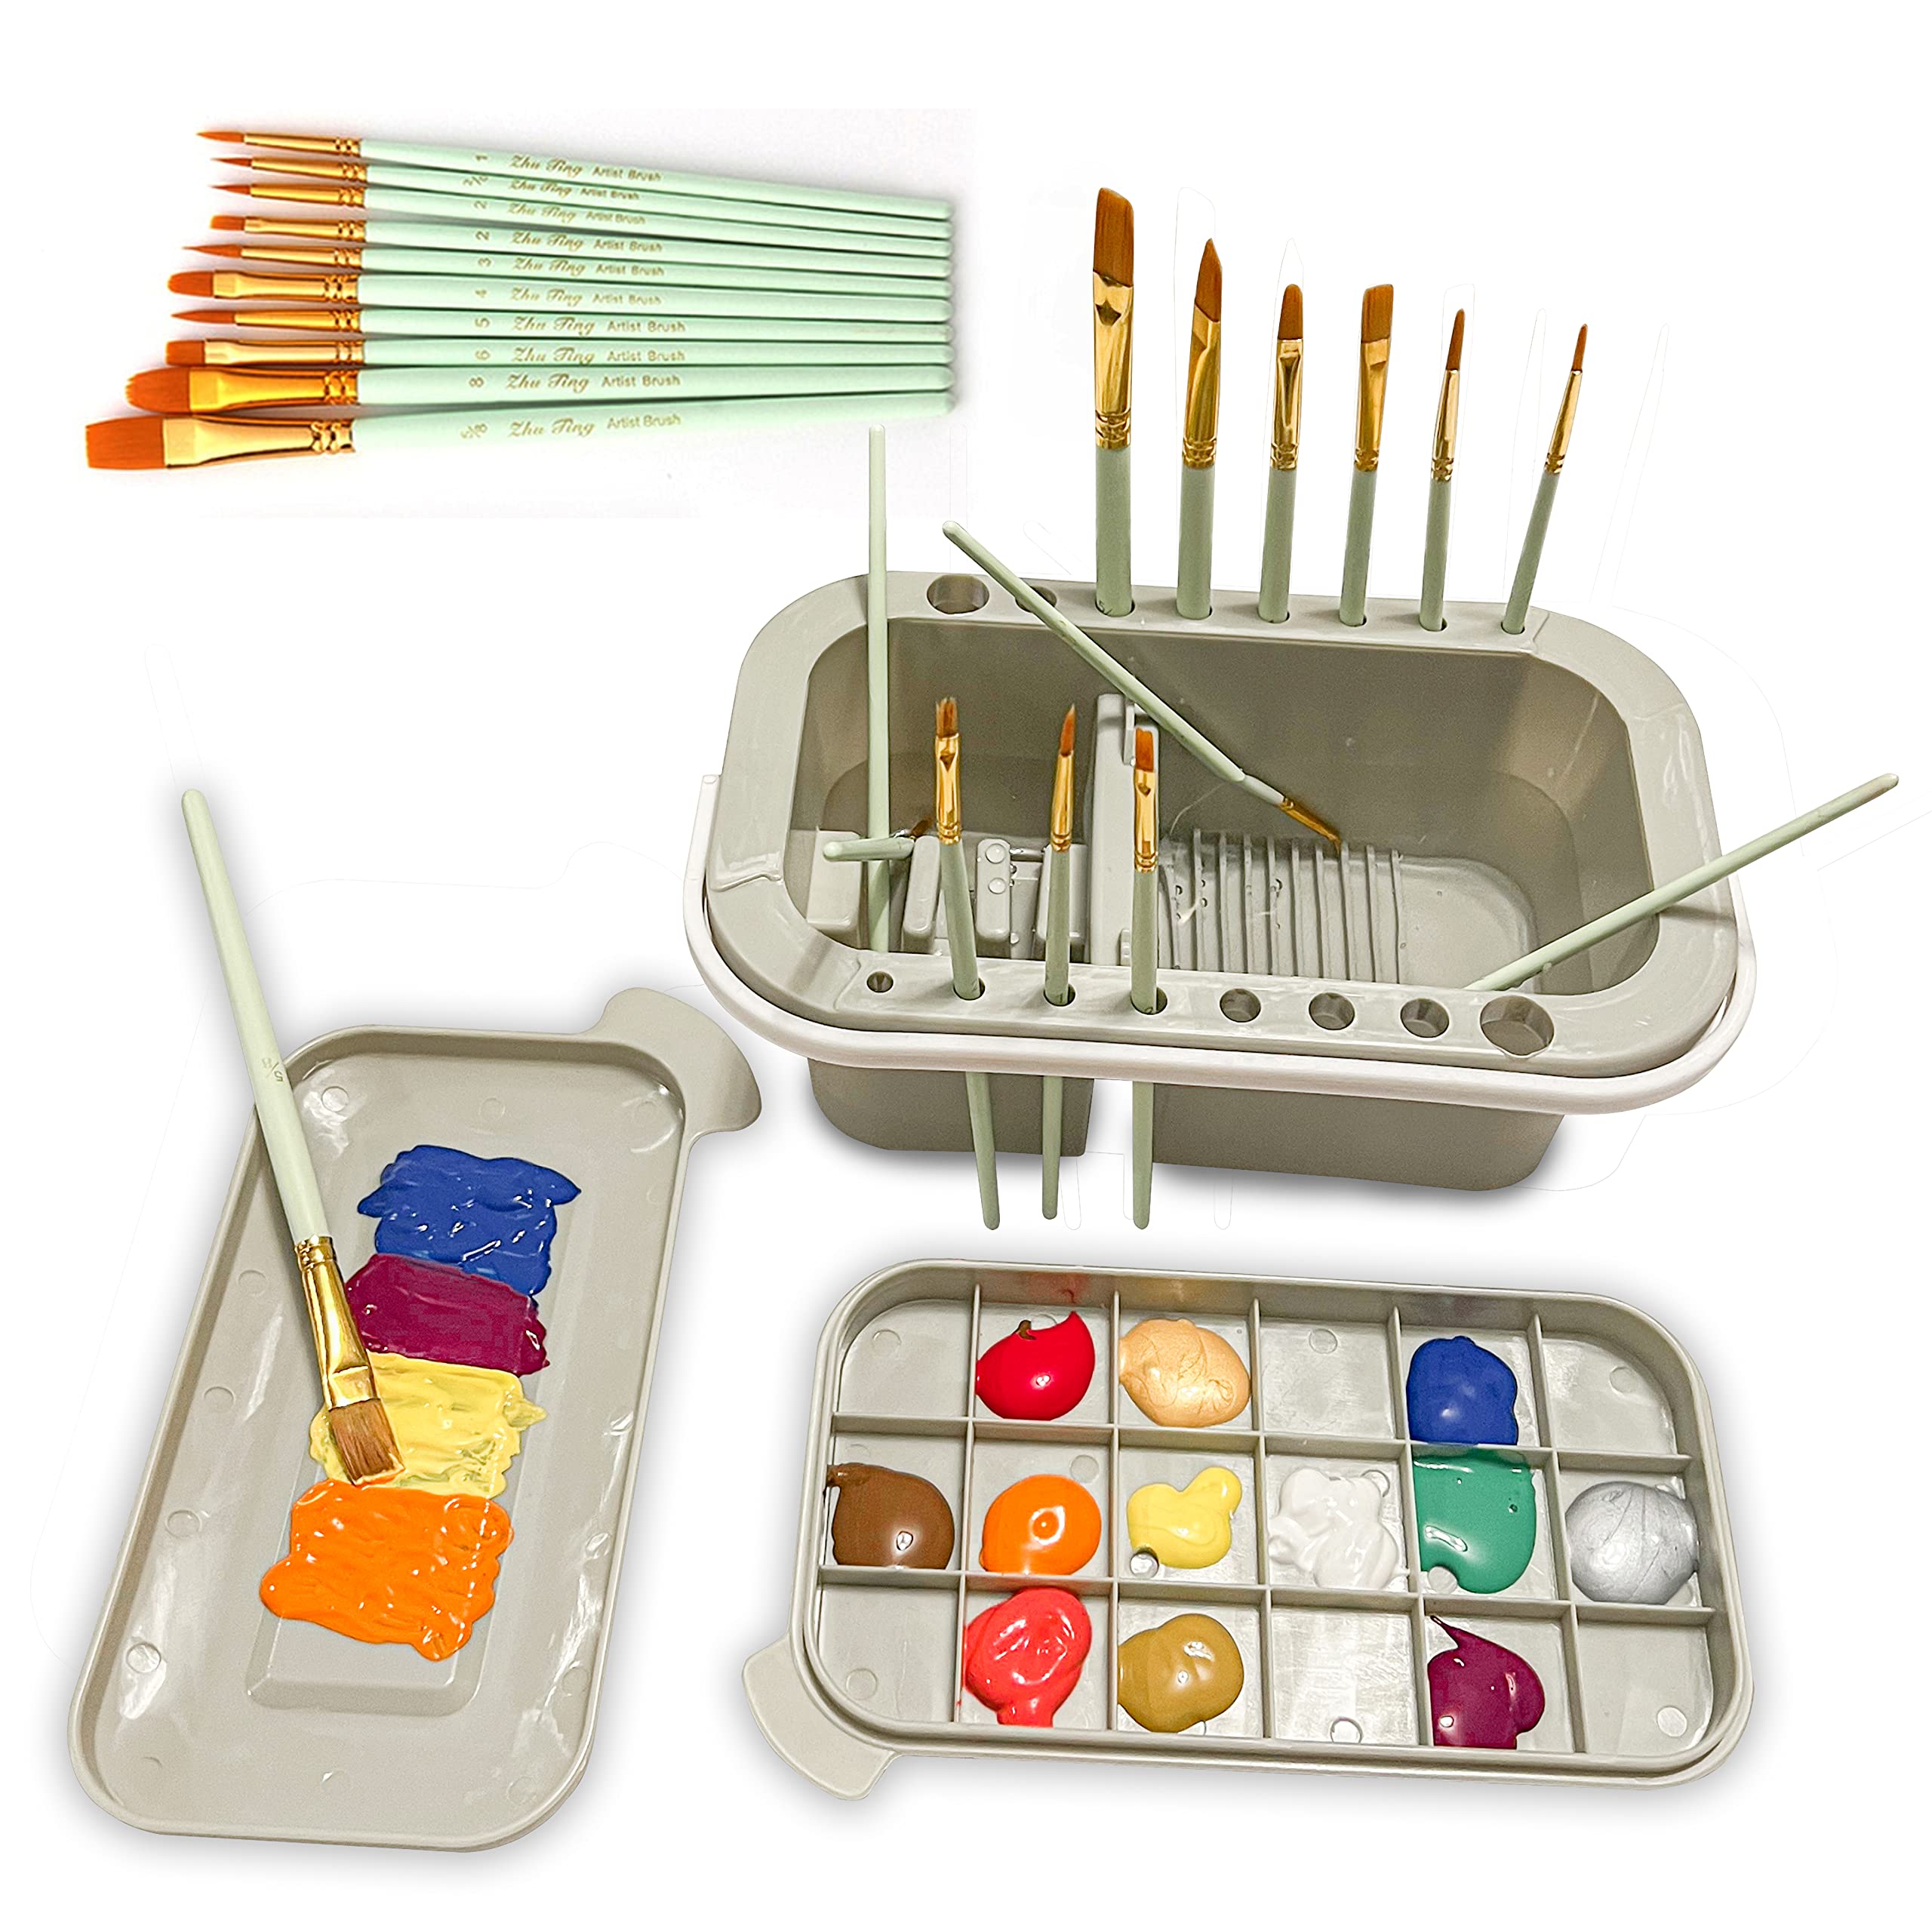  Paint Brush Rinser Durable For Painting Studio Home